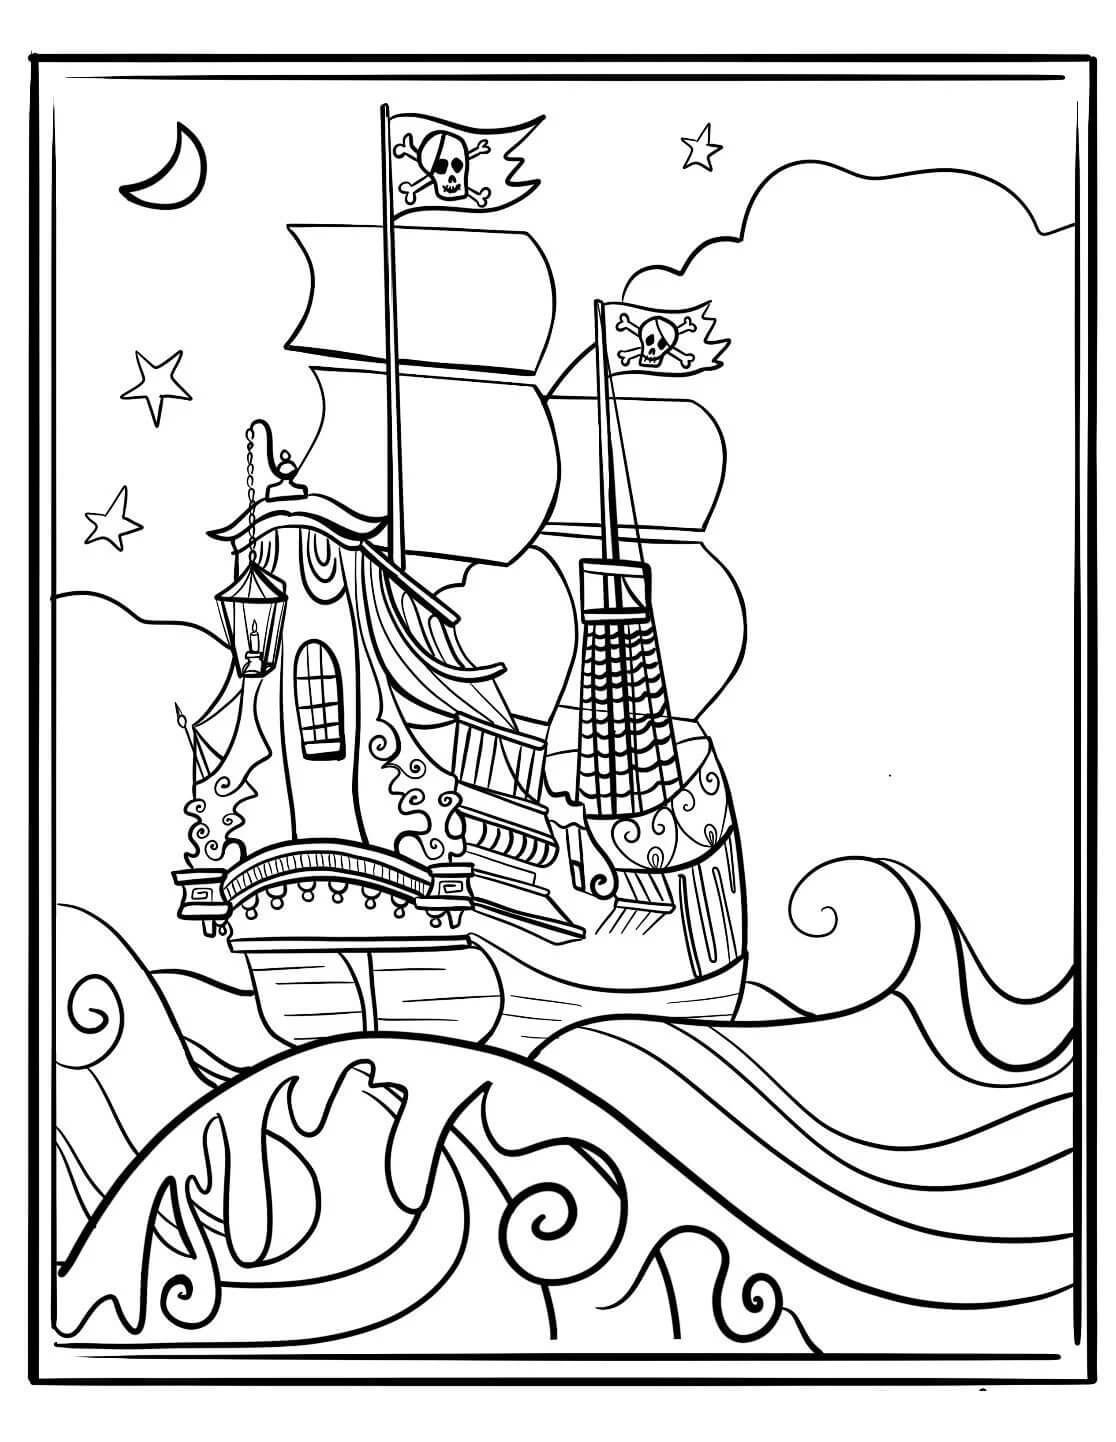 The pirate ship is for adults coloring page